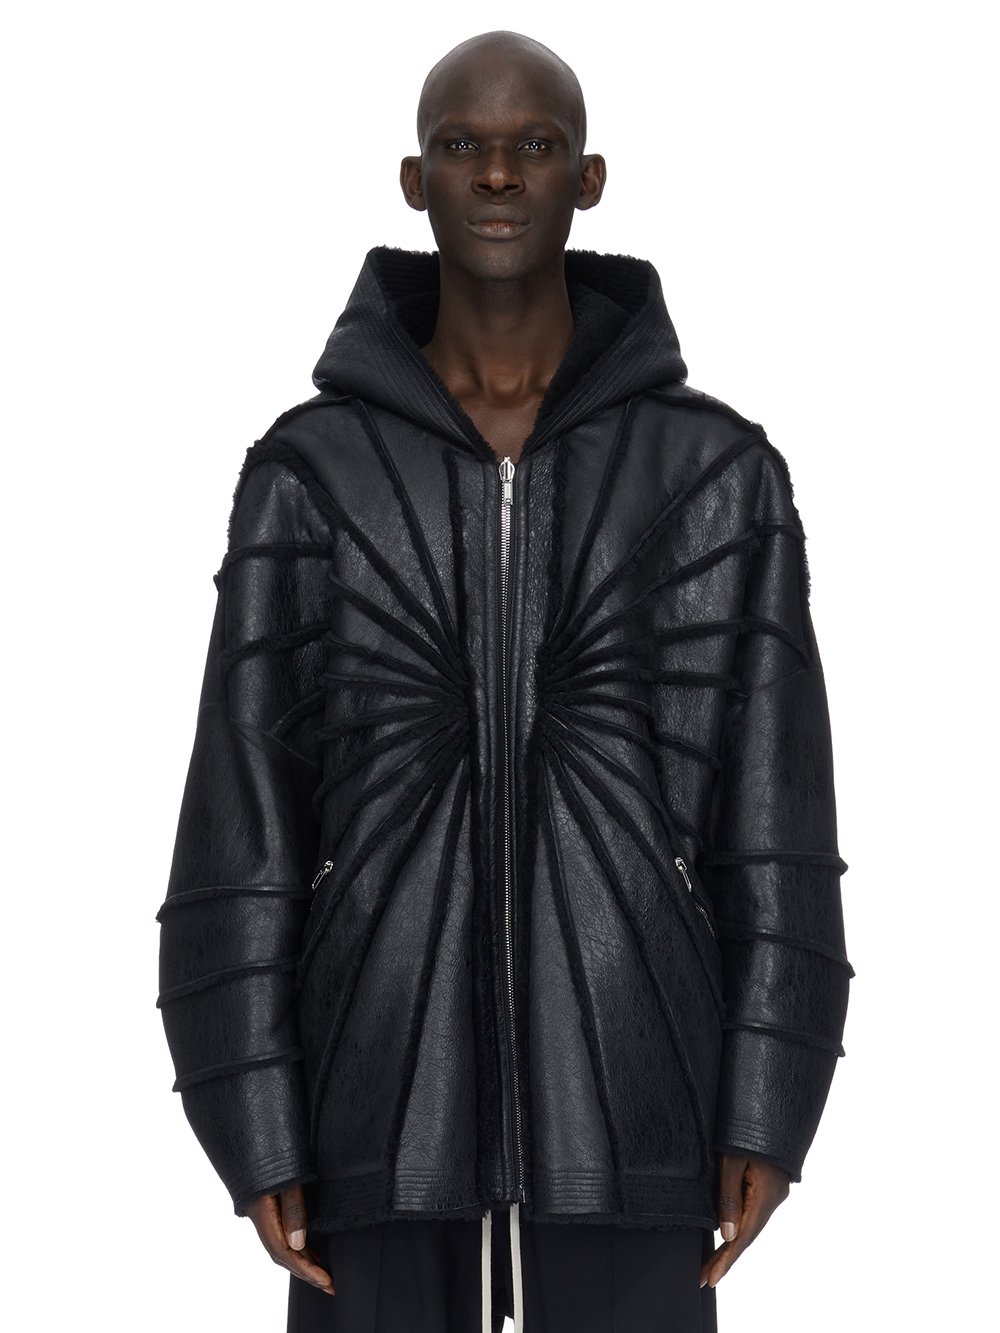 RICK OWENS FW23 LUXOR JUMBO HOODED PETER IN BLACK BUTTER LAMB SHEARLING RADIANCE